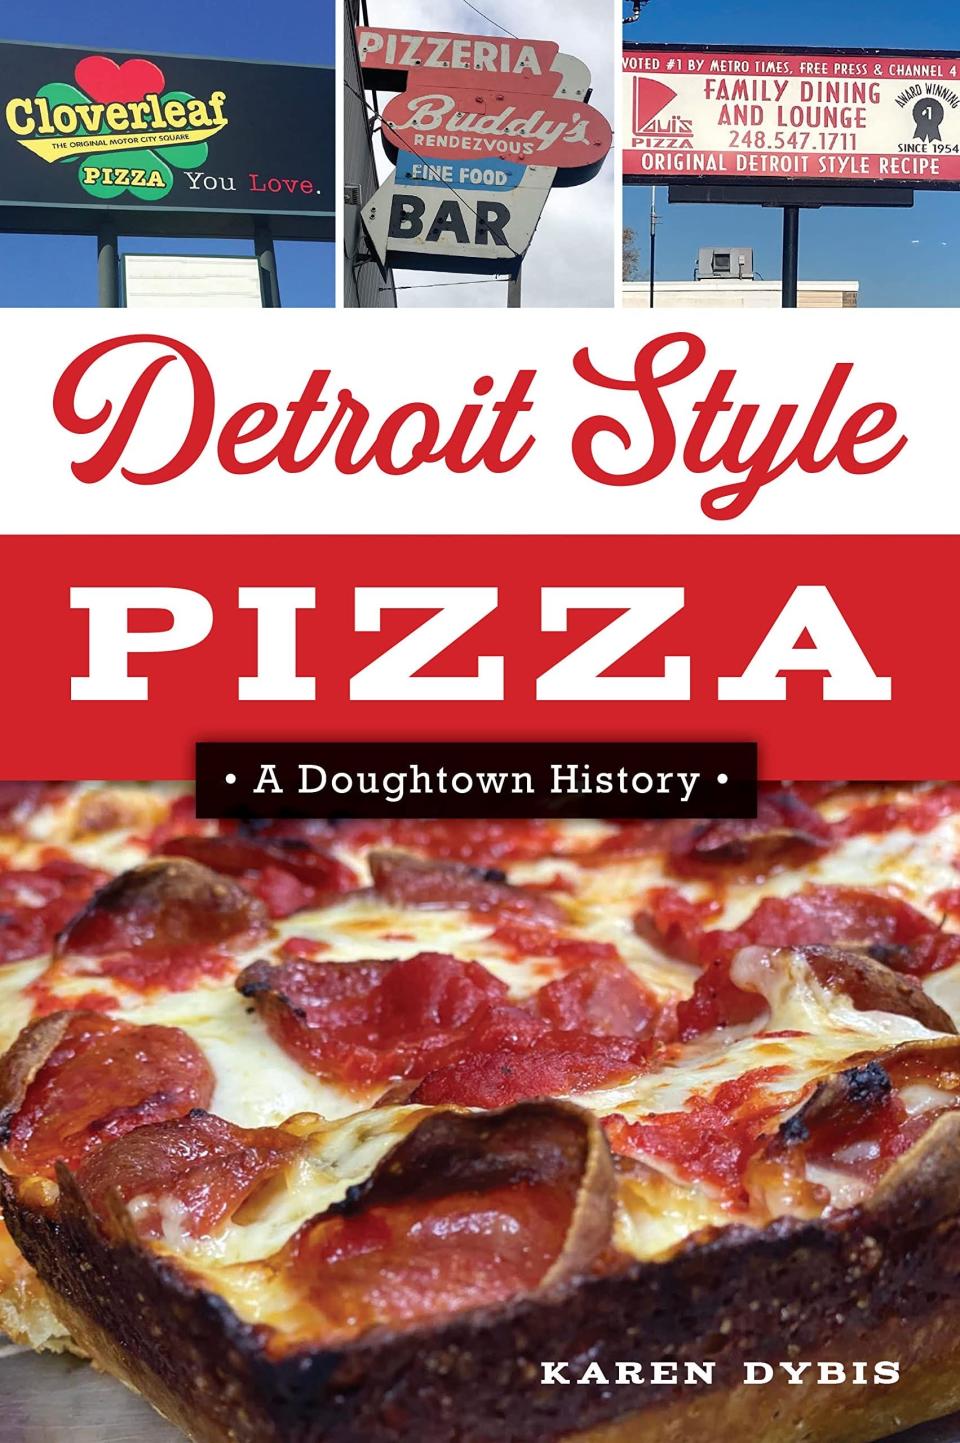 Detroit Style Pizza is from local author Karen Dybis